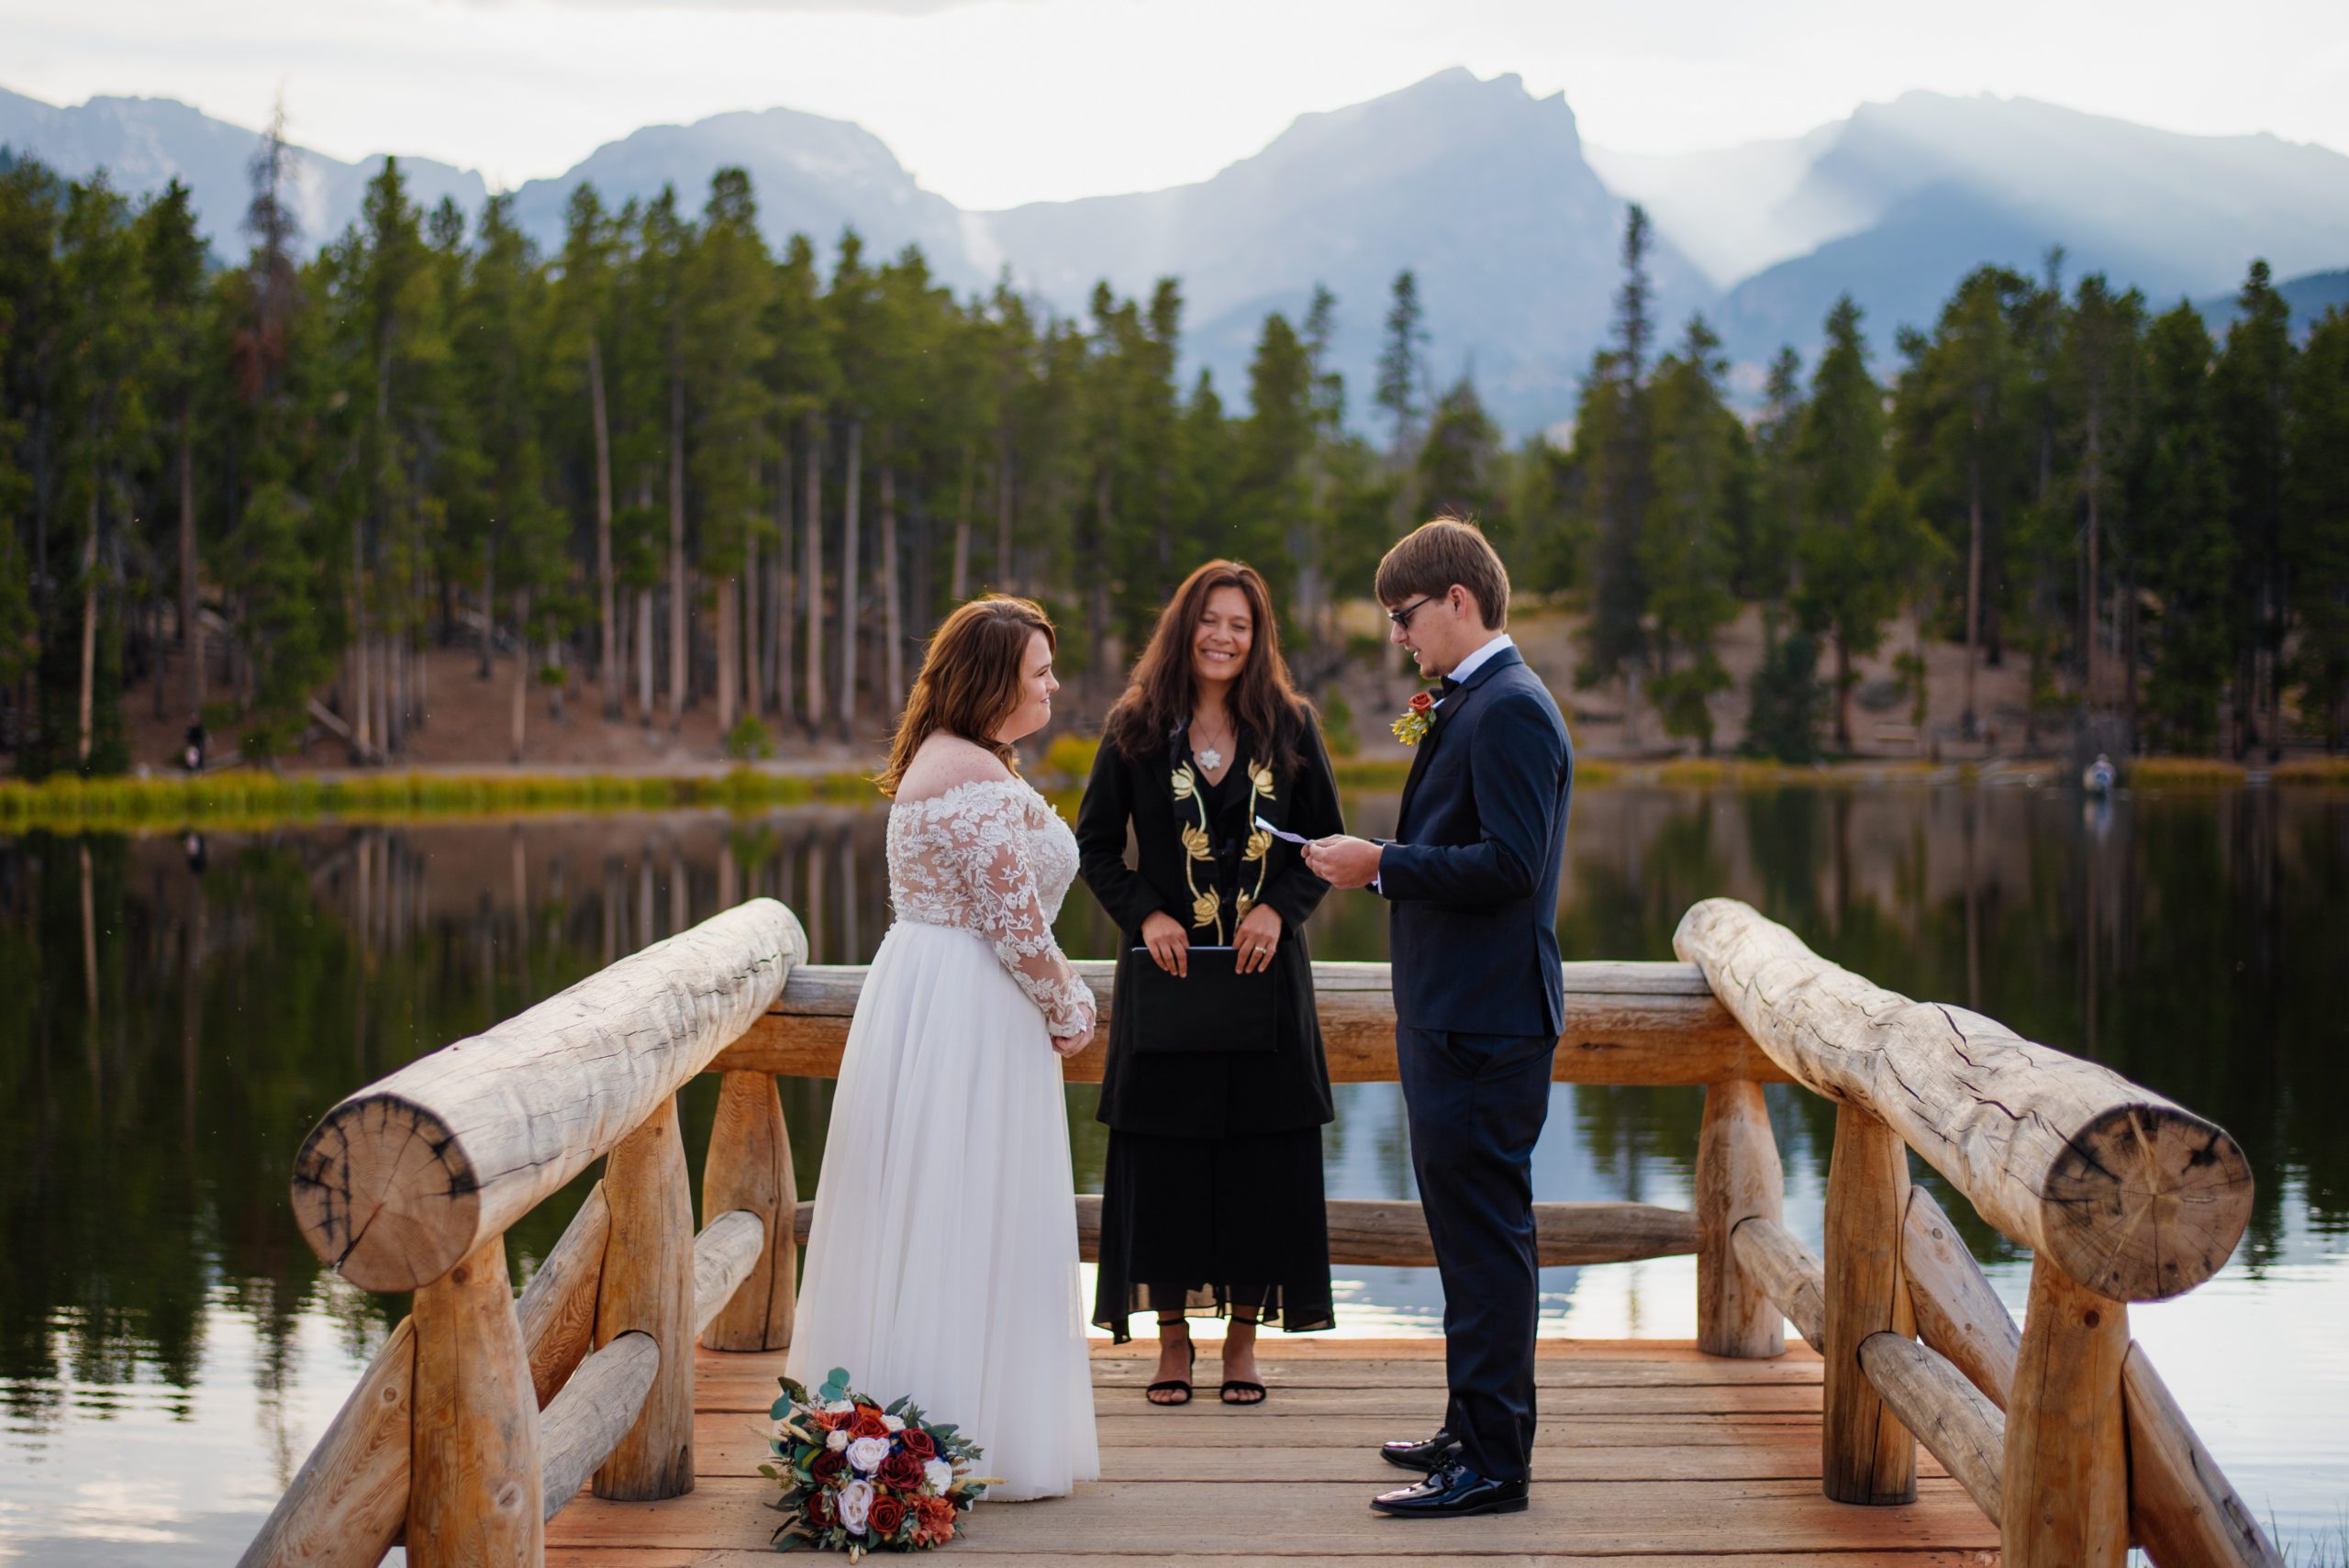 Groom reads vows to his Bride during elopement Ceremony at Sprague Lake - RMNP